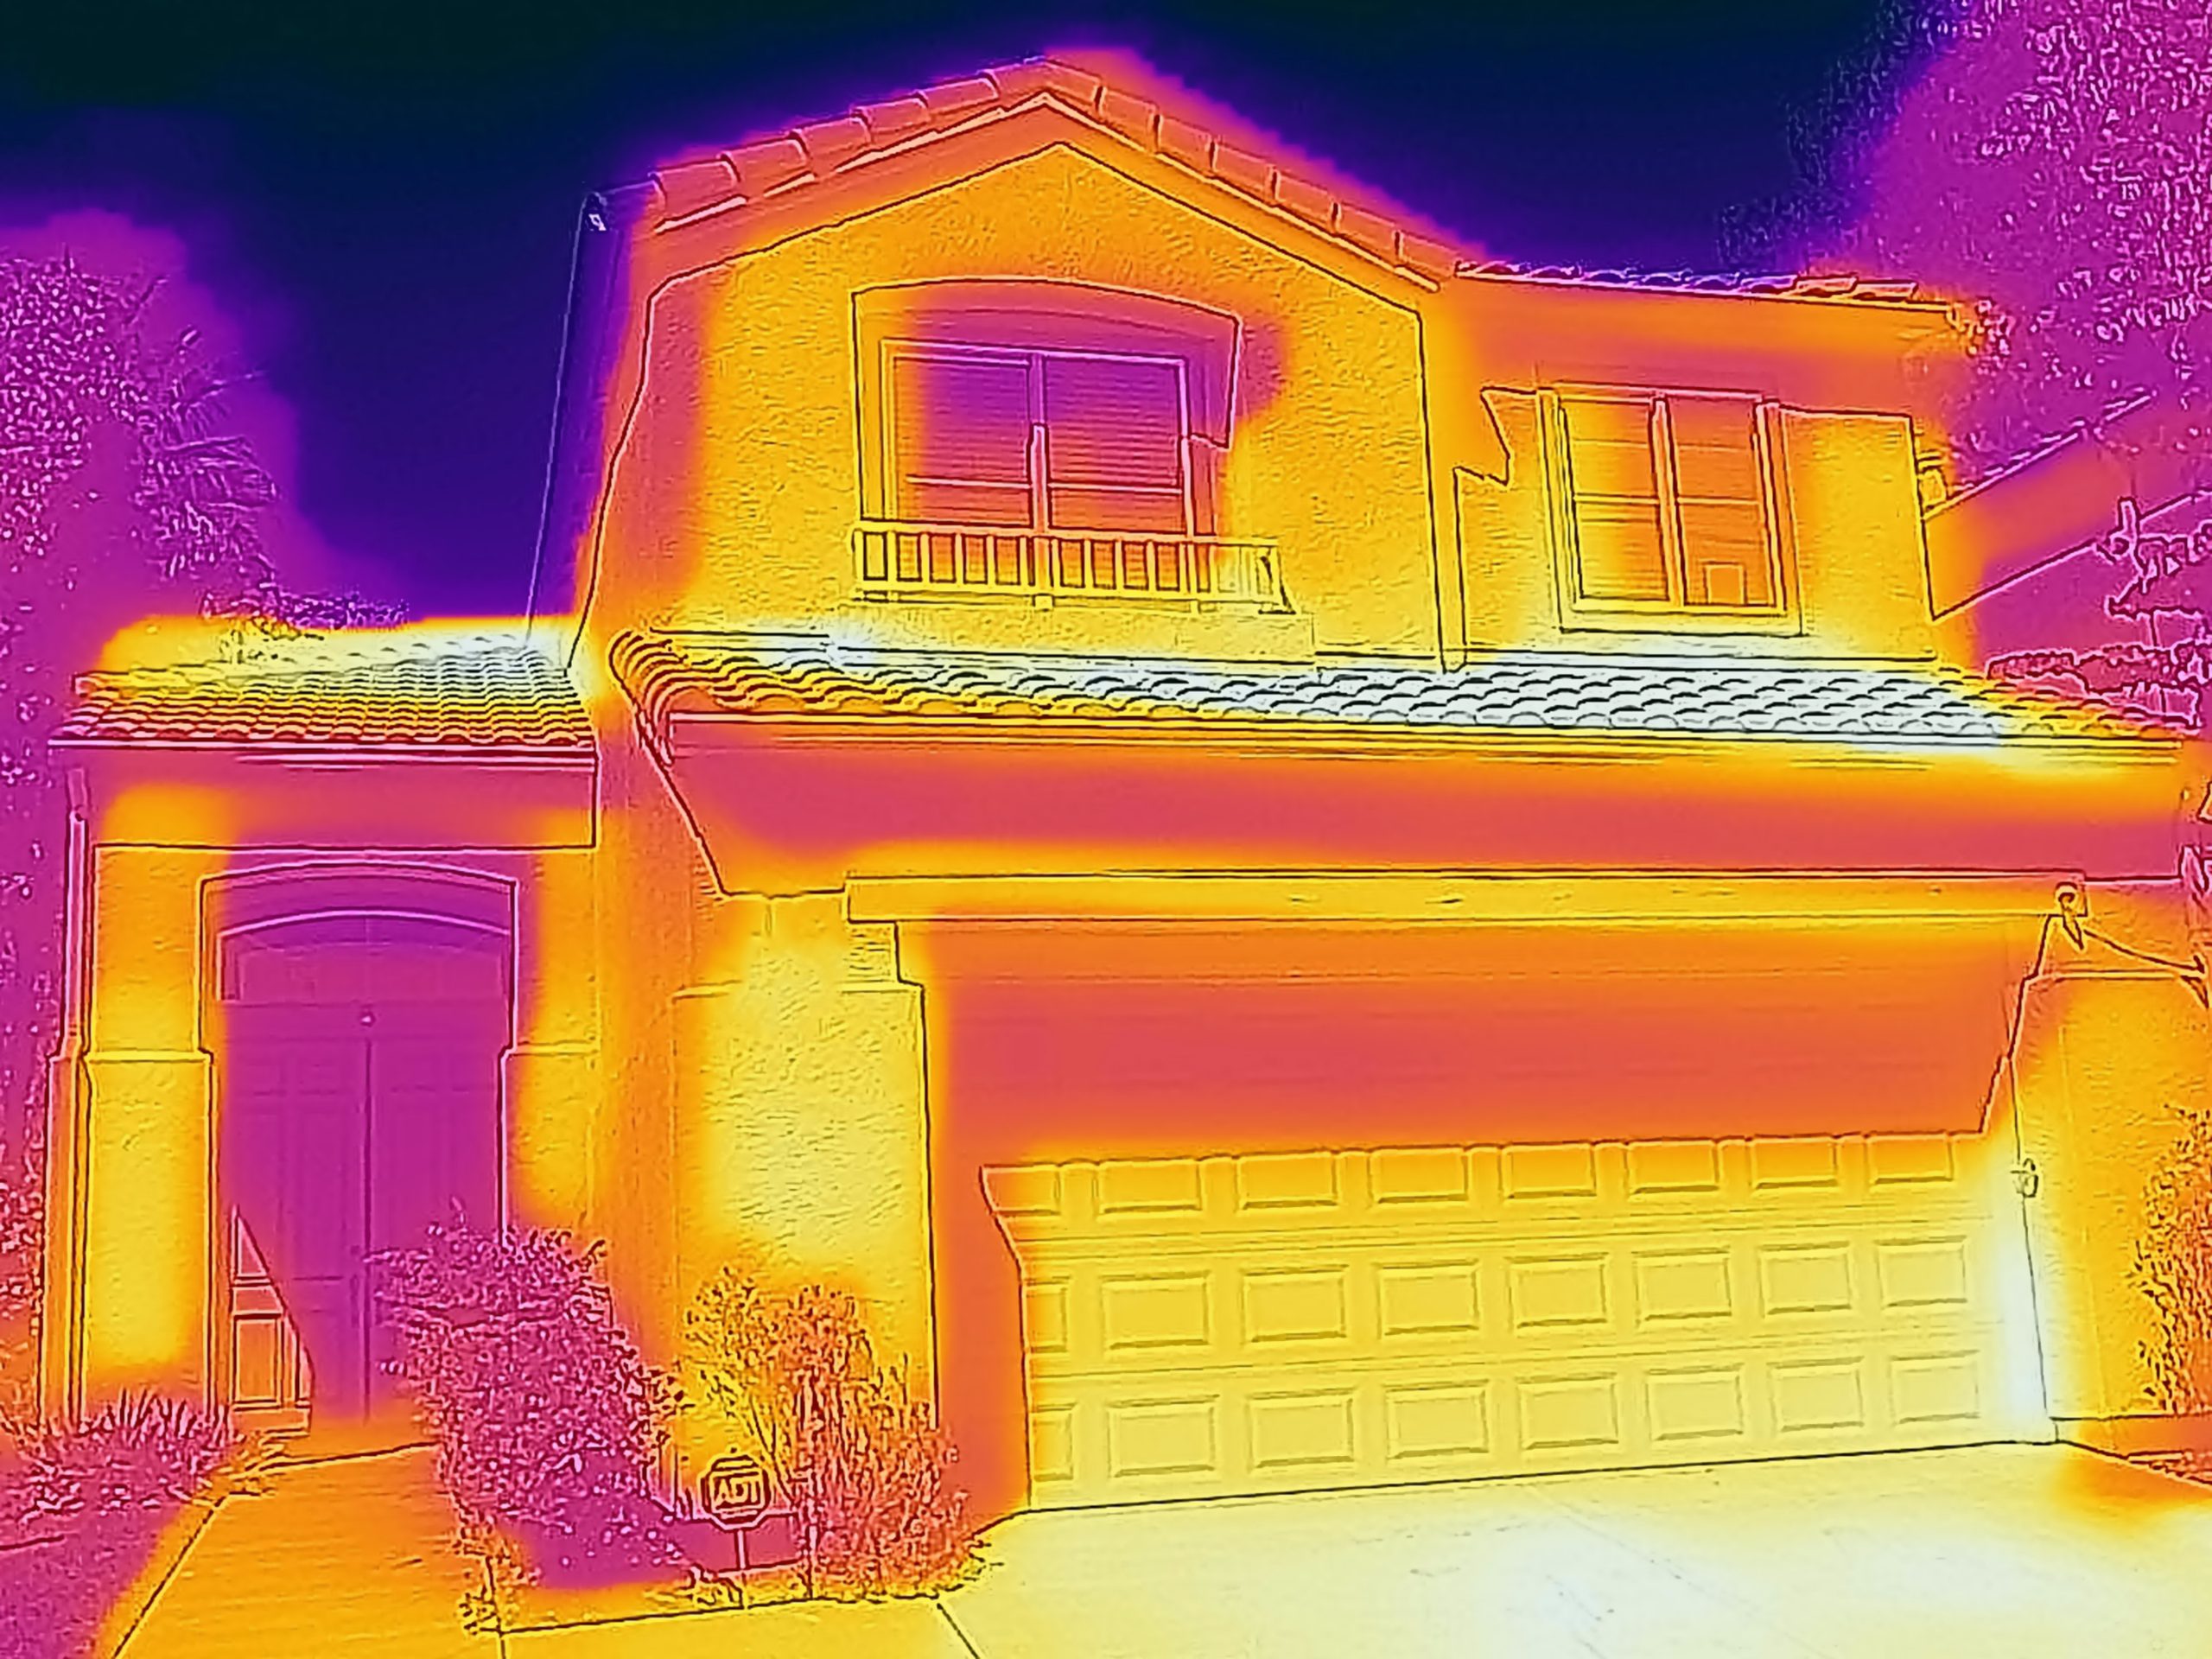 Homes do more damage to climate than cars